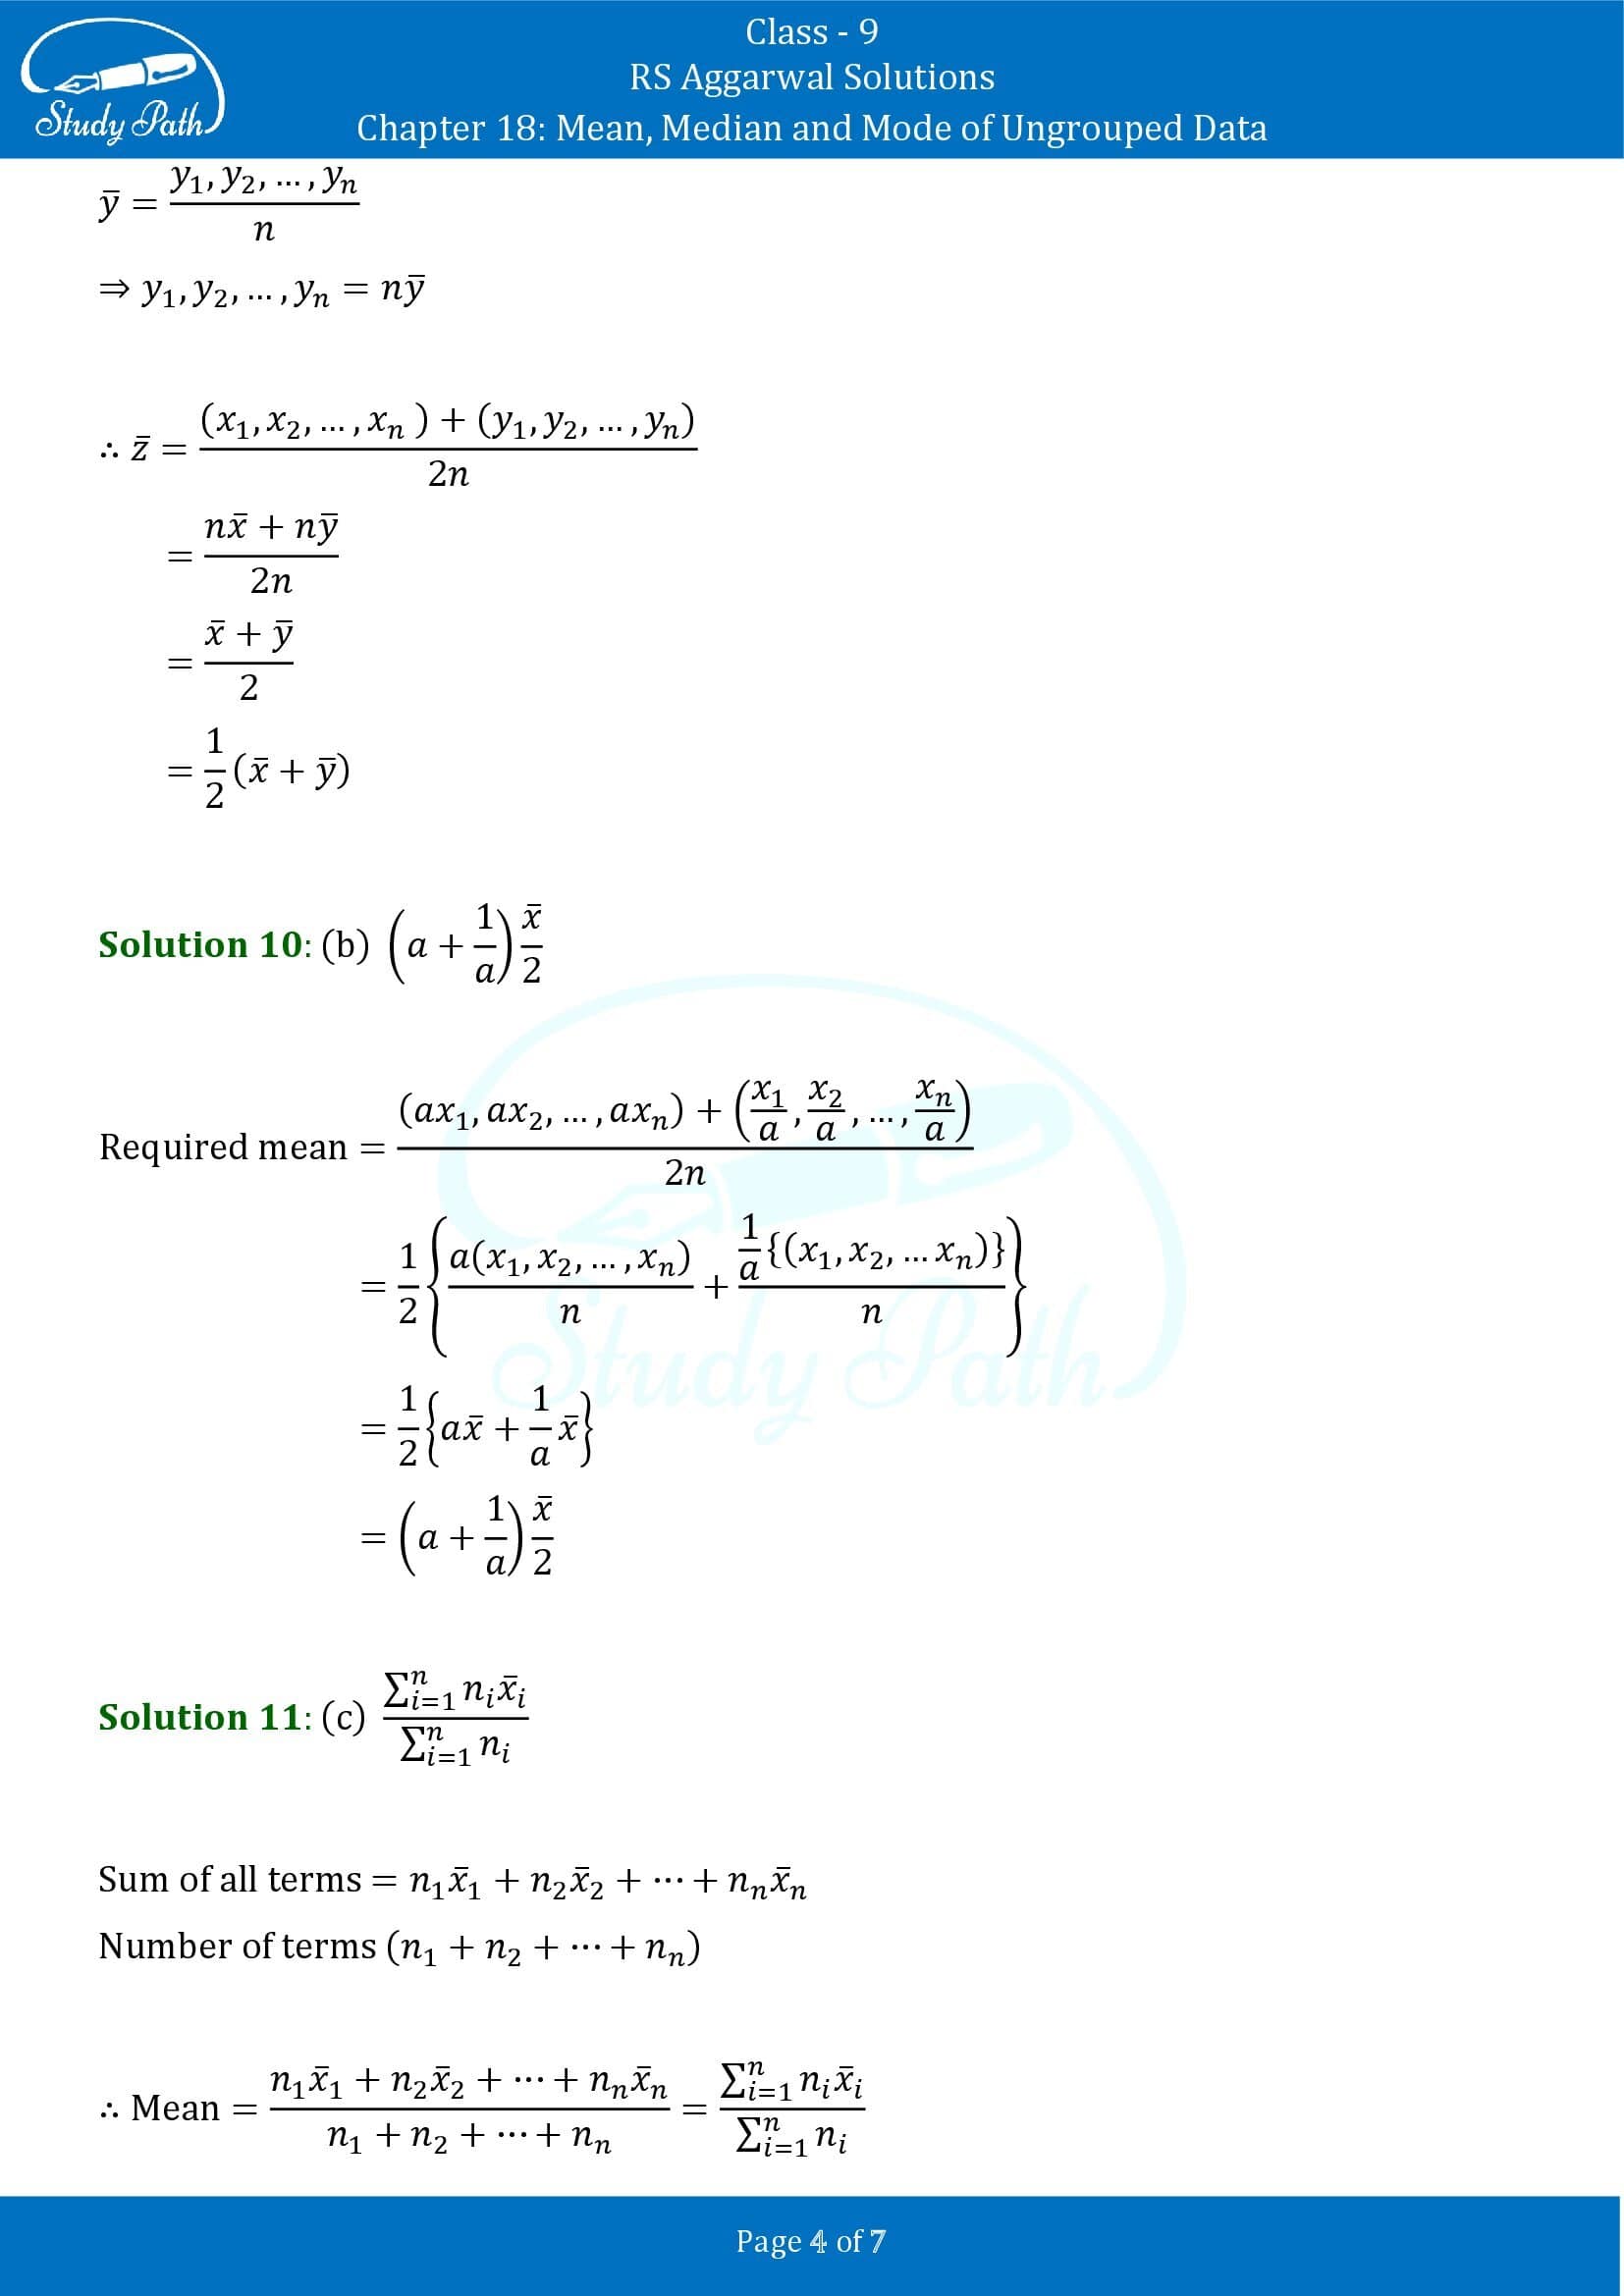 RS Aggarwal Solutions Class 9 Chapter 18 Mean Median and Mode of Ungrouped Data Multiple Choice Questions MCQs 00004